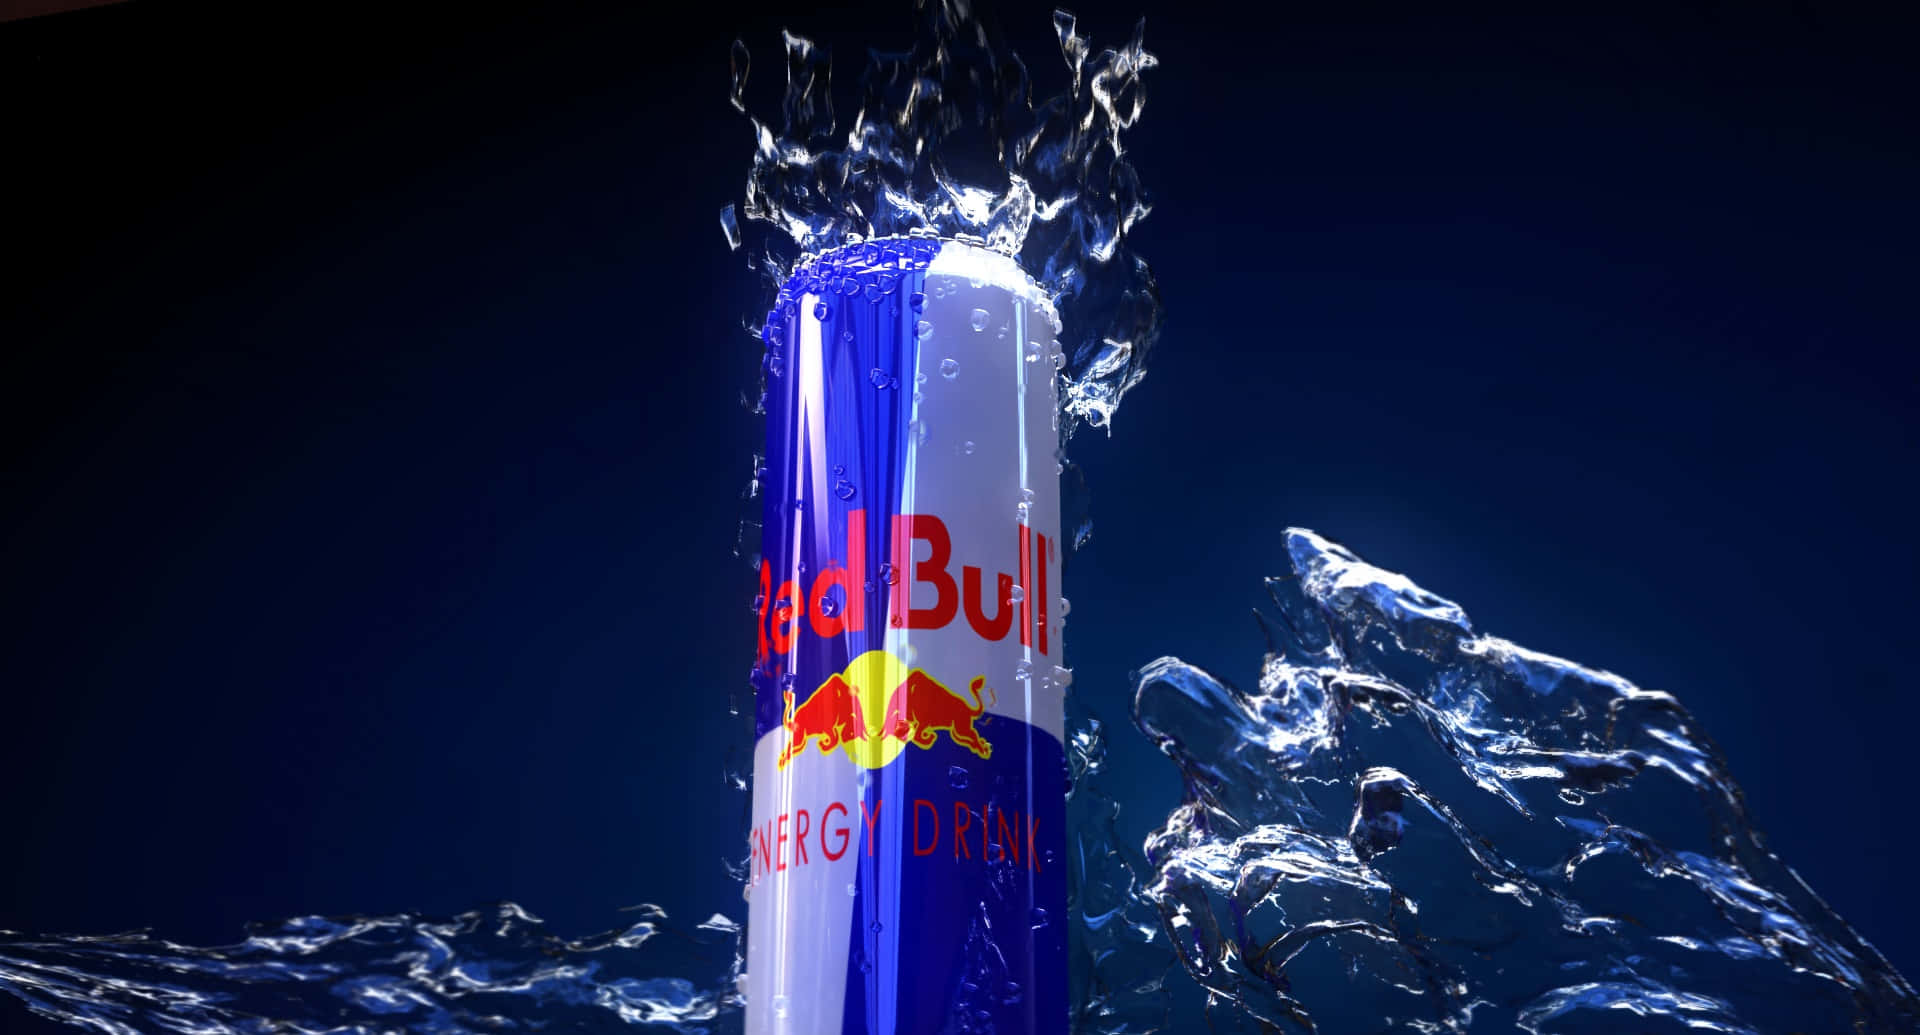 Get an energy boost with Red Bull!